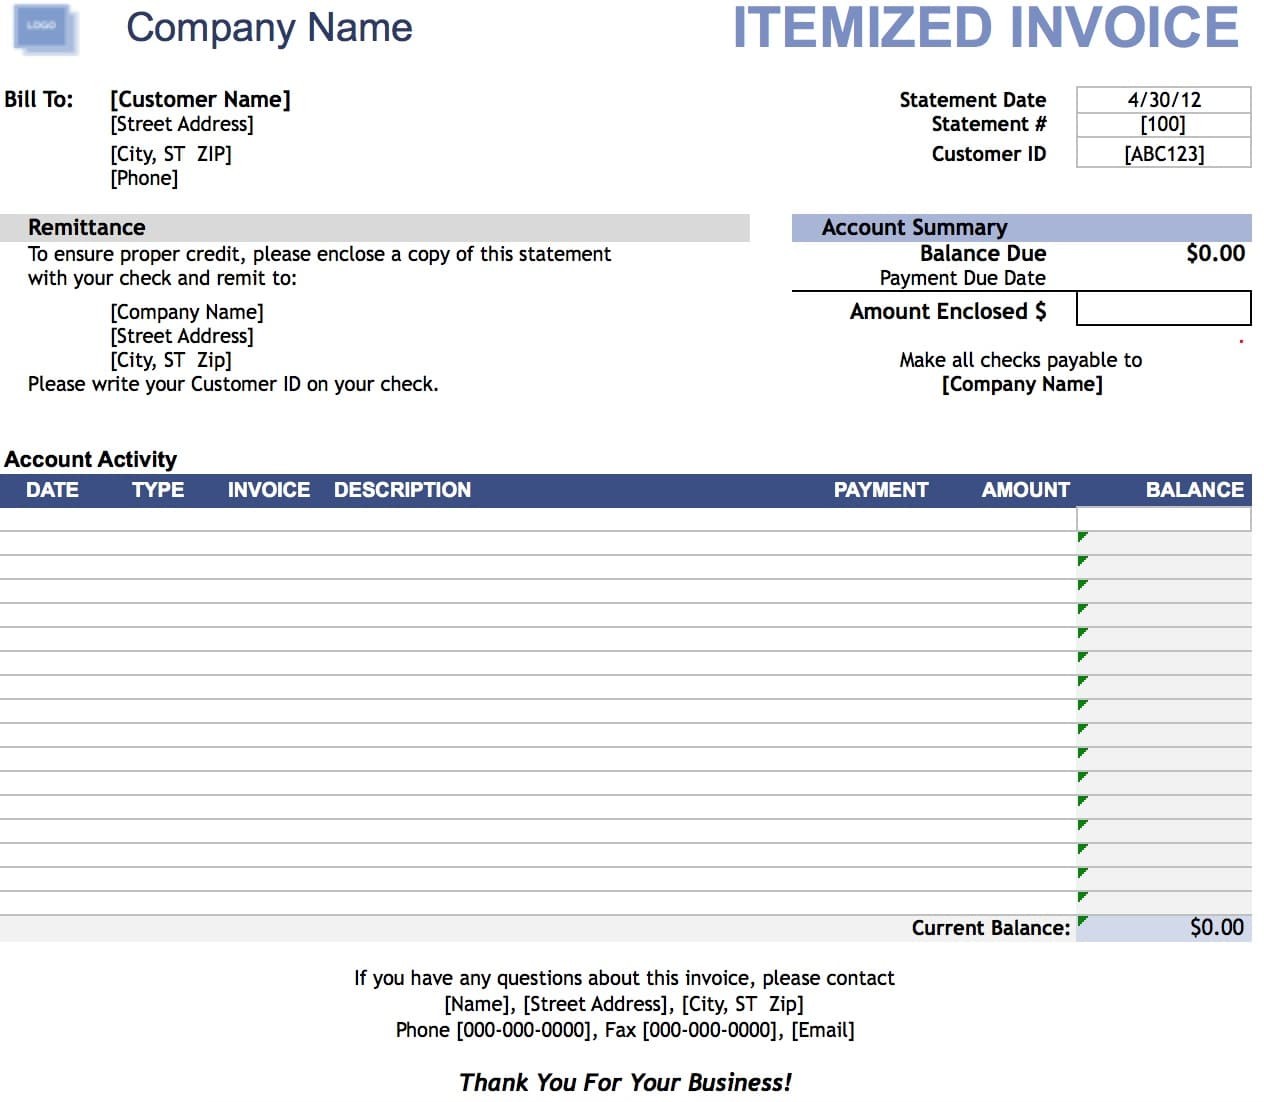 Free Itemized Invoice Template Excel PDF Word Doc Document Spreadsheet